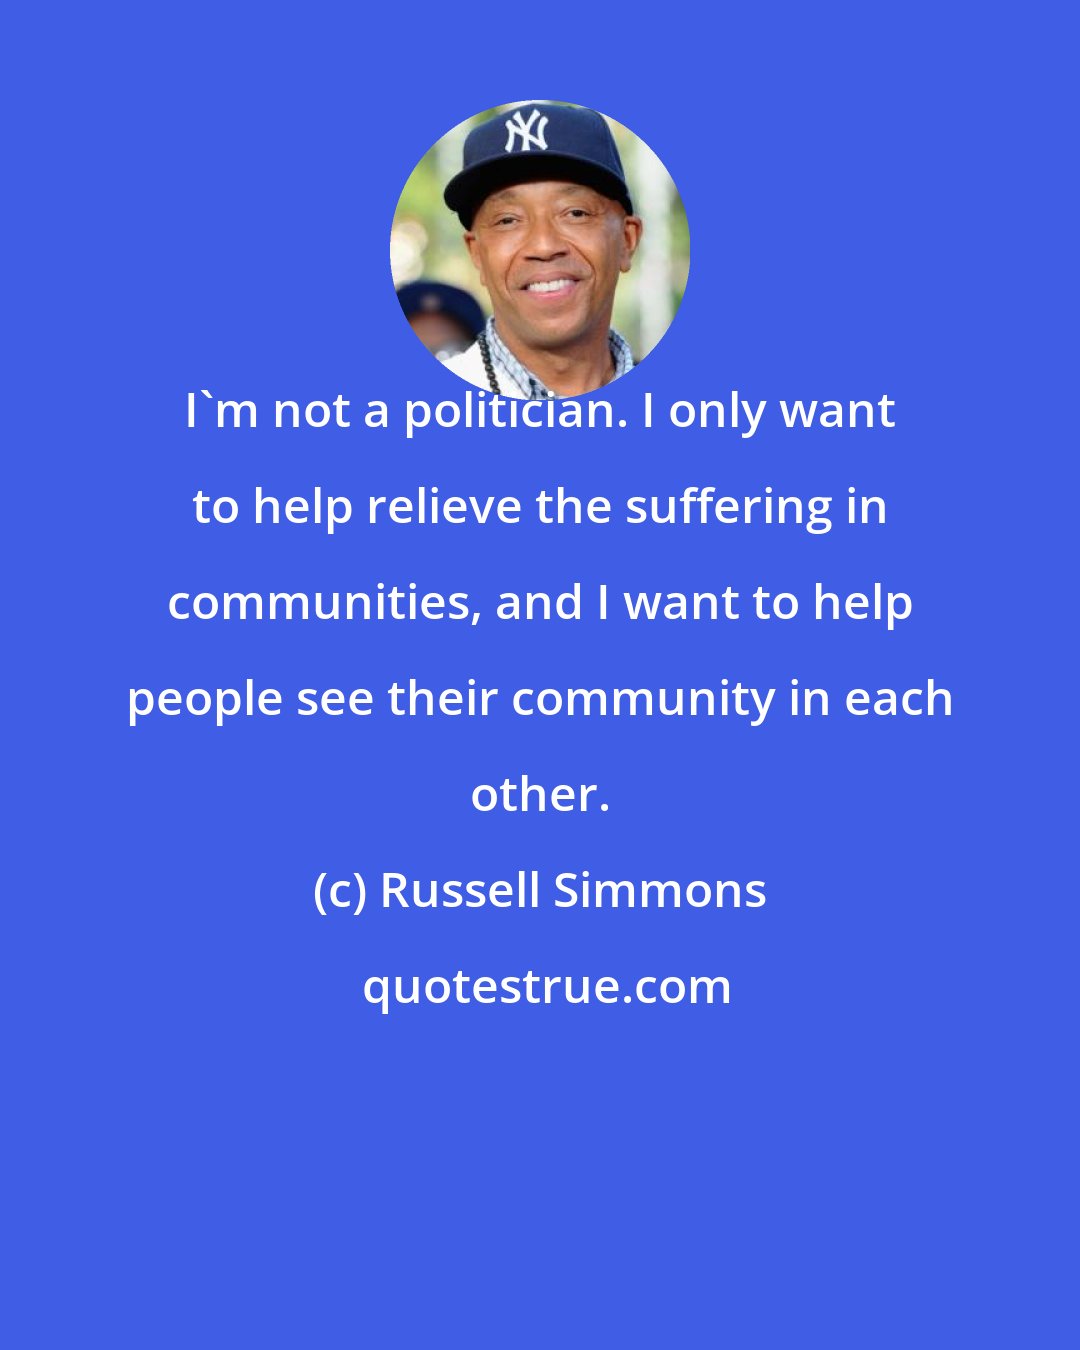 Russell Simmons: I'm not a politician. I only want to help relieve the suffering in communities, and I want to help people see their community in each other.